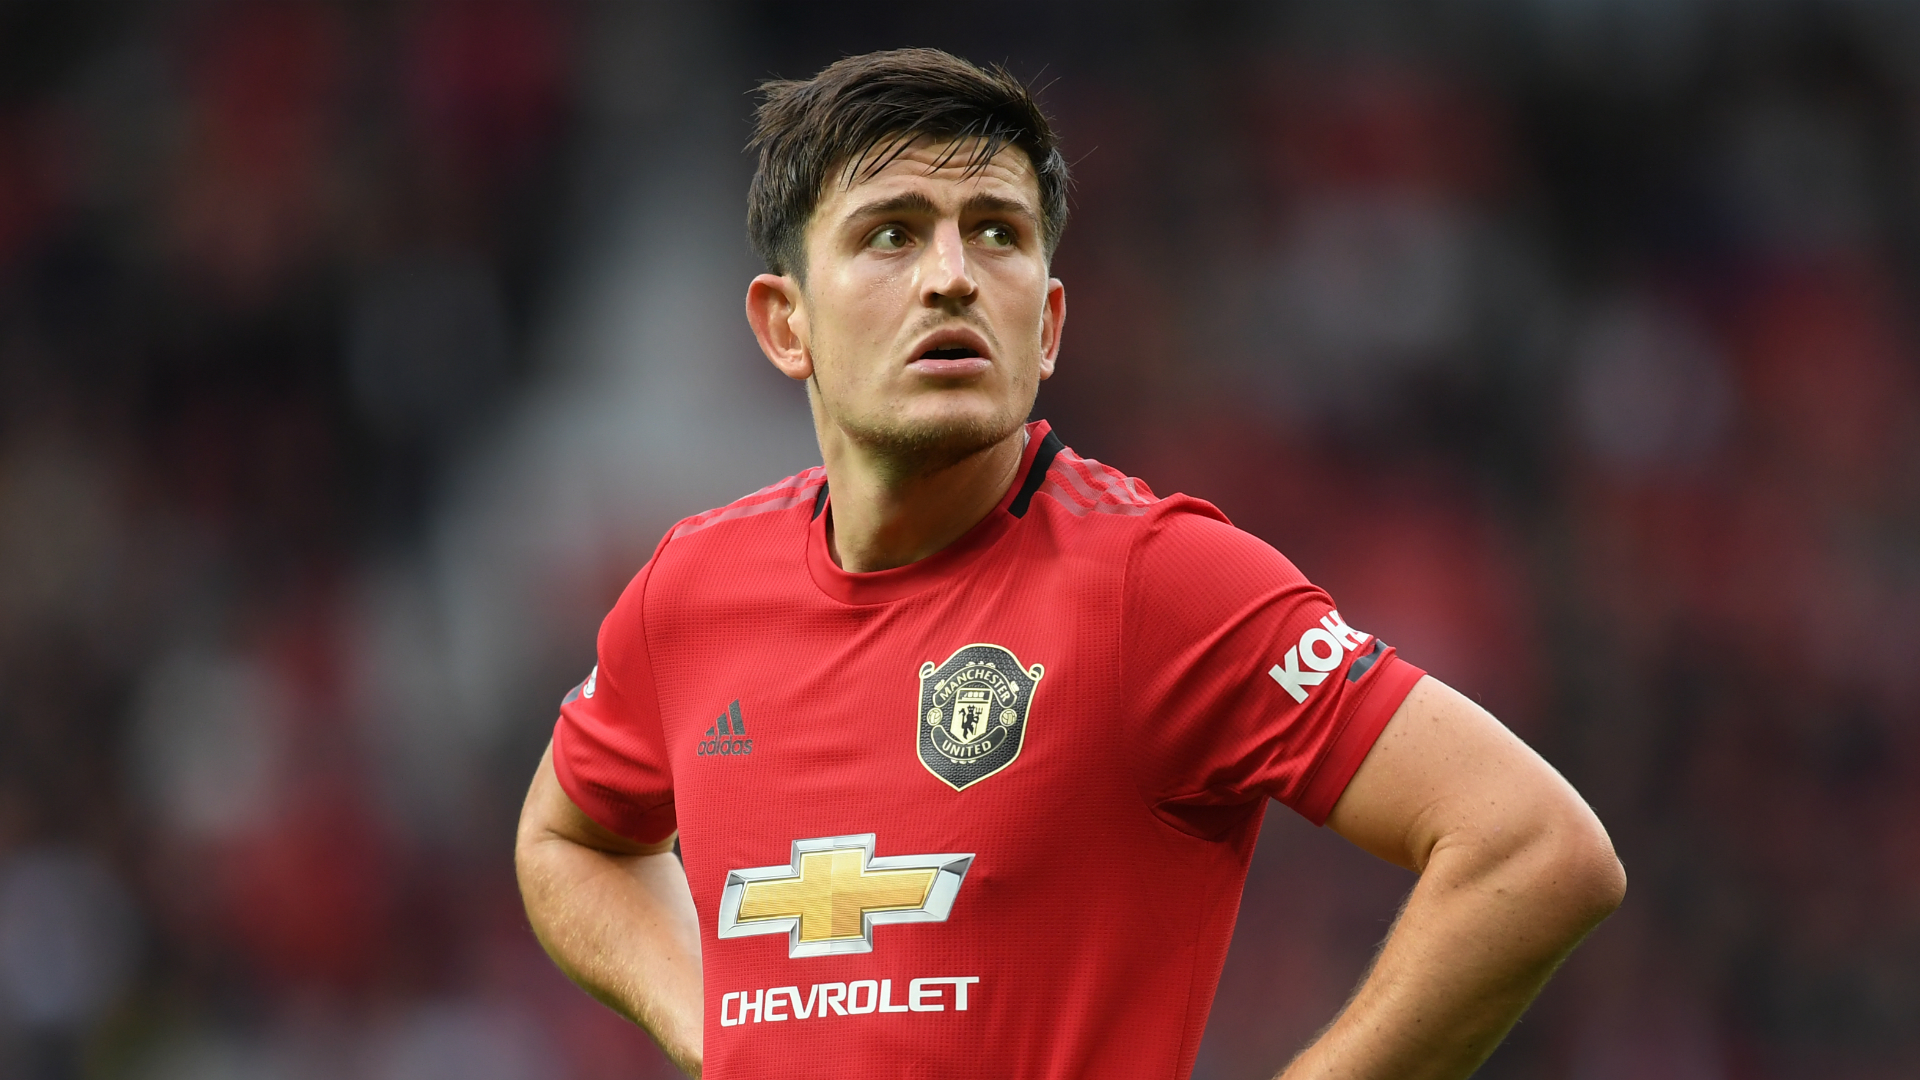 Harry Maguire faces former club Leicester City as Manchester United aim to regain winning form following the international break.